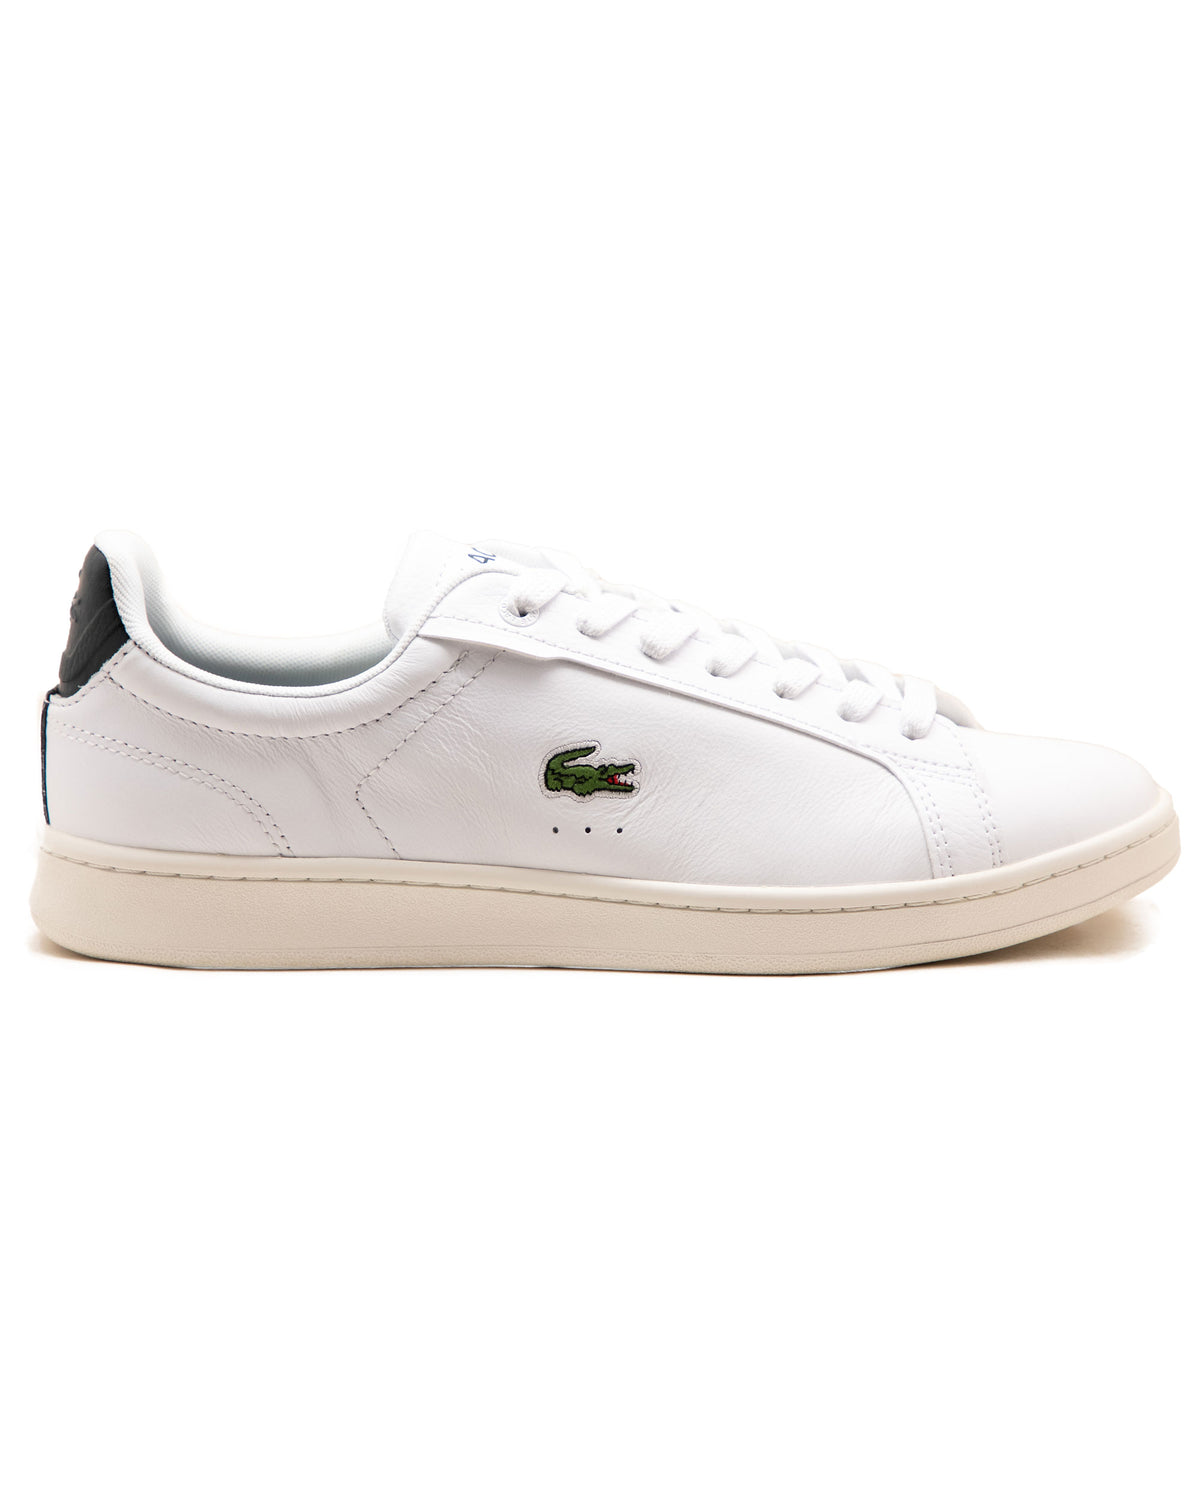 Lacoste Carnaby Pro 123 9 White Green